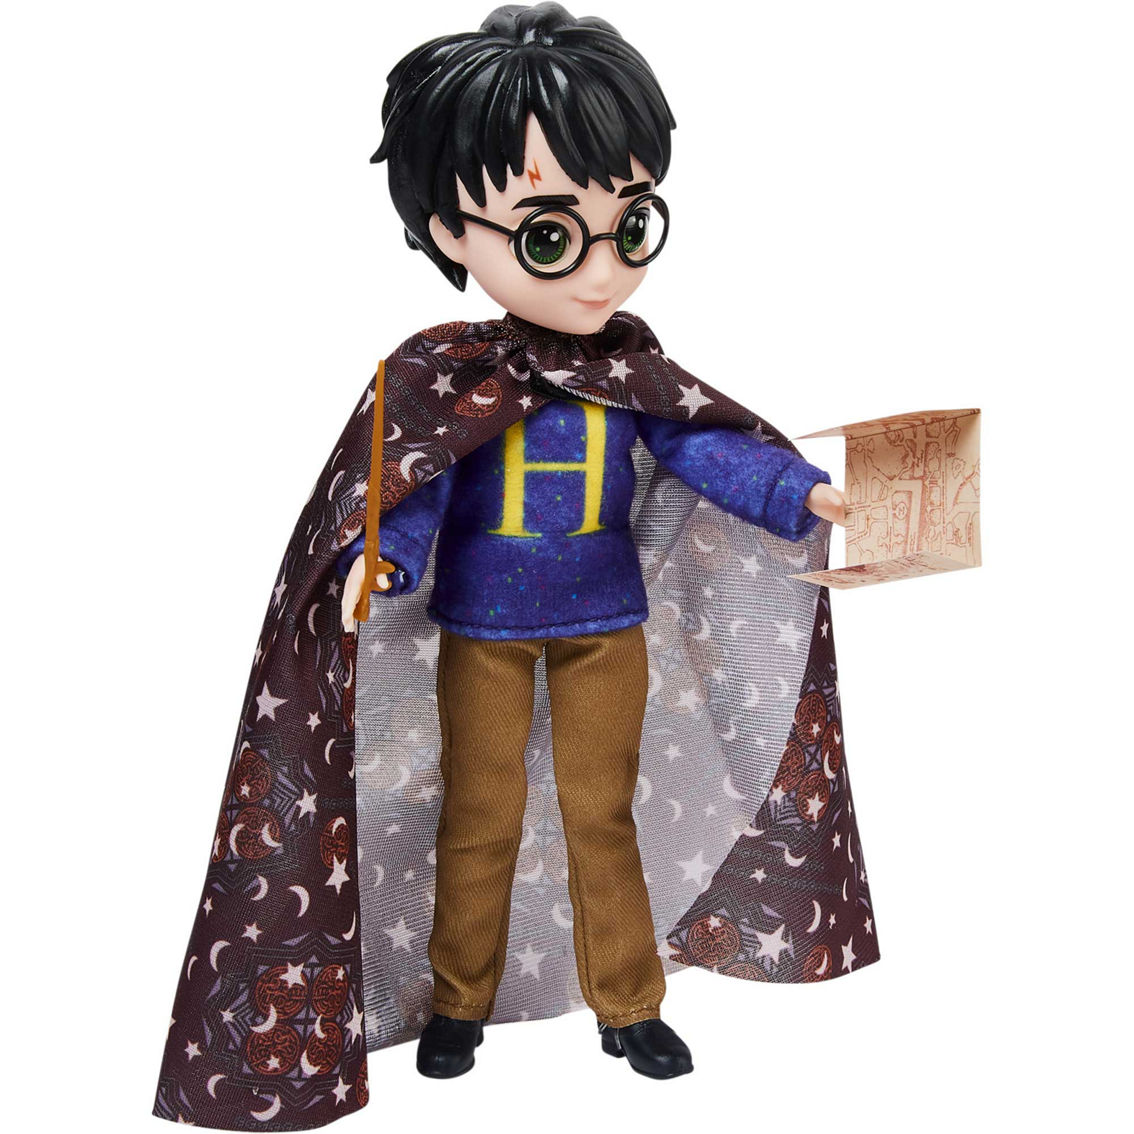 Wizarding World 8 in. Deluxe Harry Potter Doll - Image 9 of 9